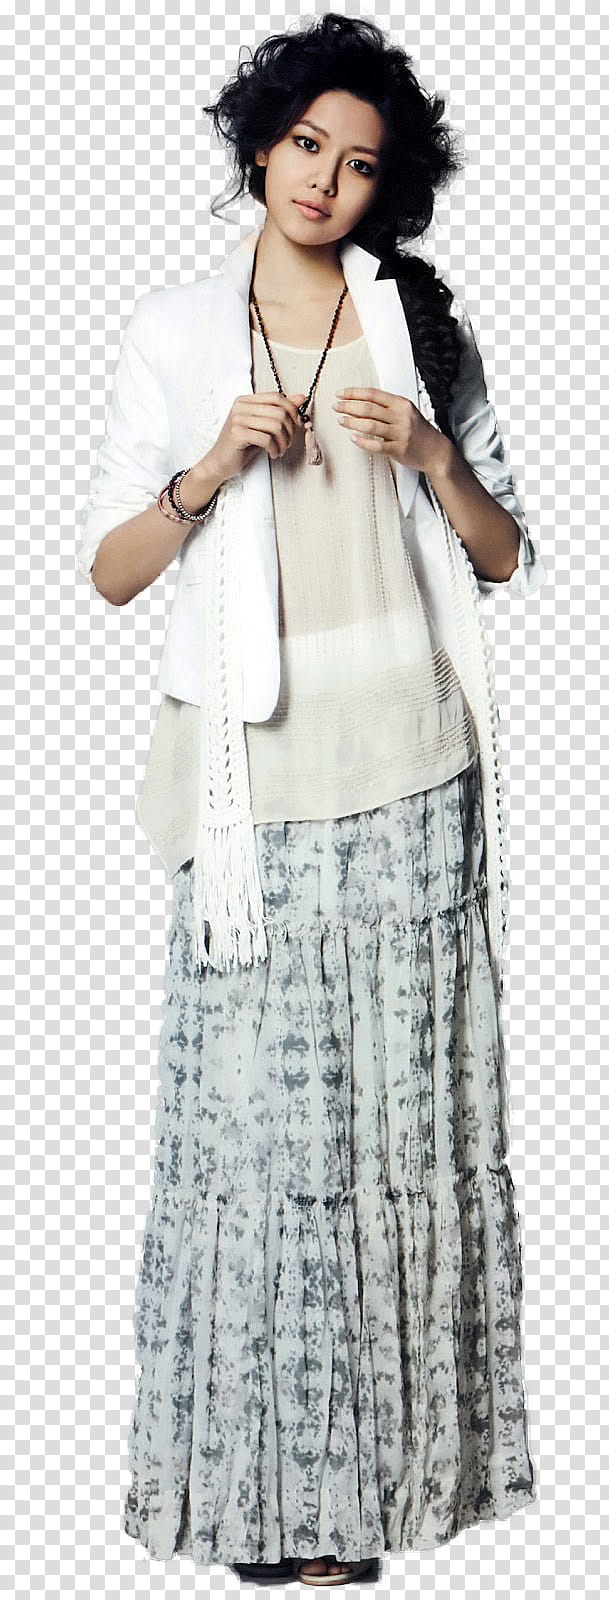 Sooyoung SNSD, standing woman wearing white shirt, white scarf, and white skirt transparent background PNG clipart